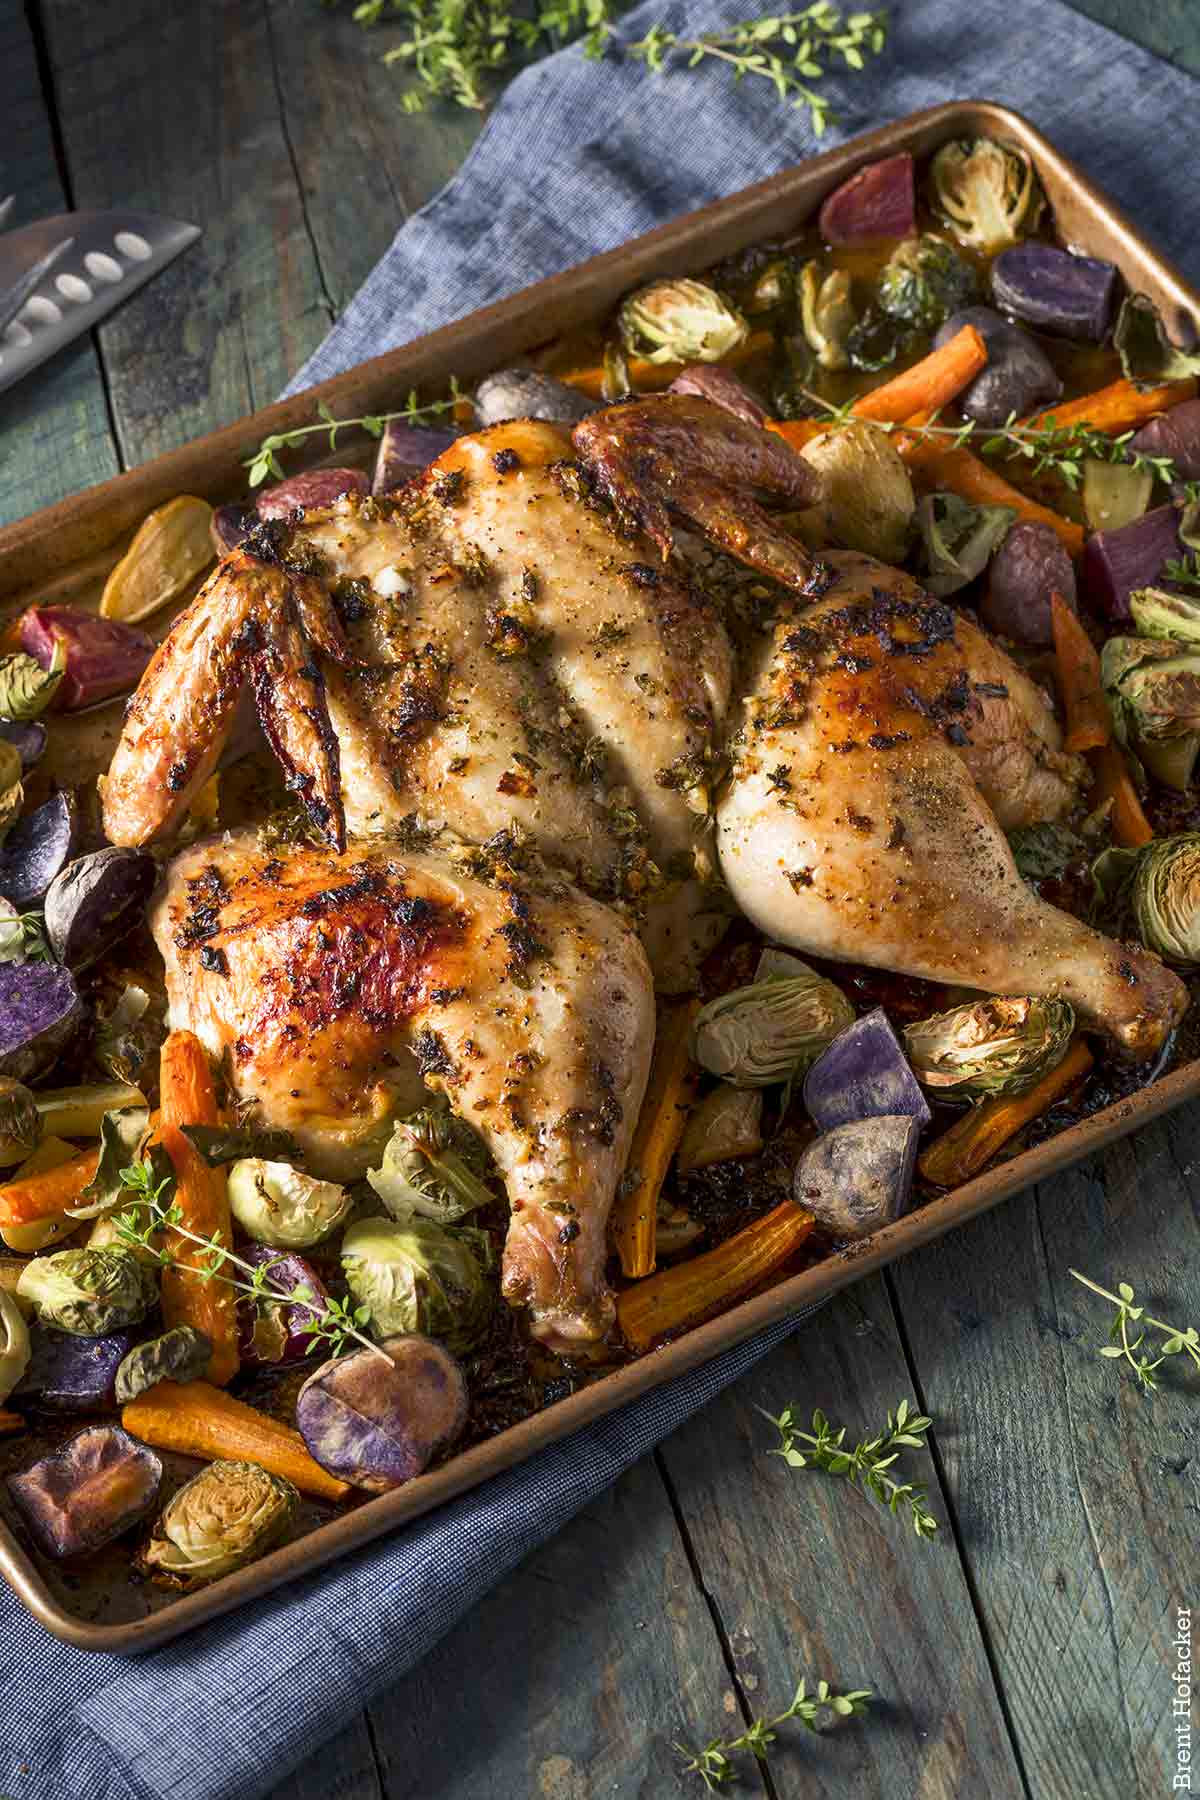 A whole spatchcocked chicken on a roasting pan, surrounded by vegetables.